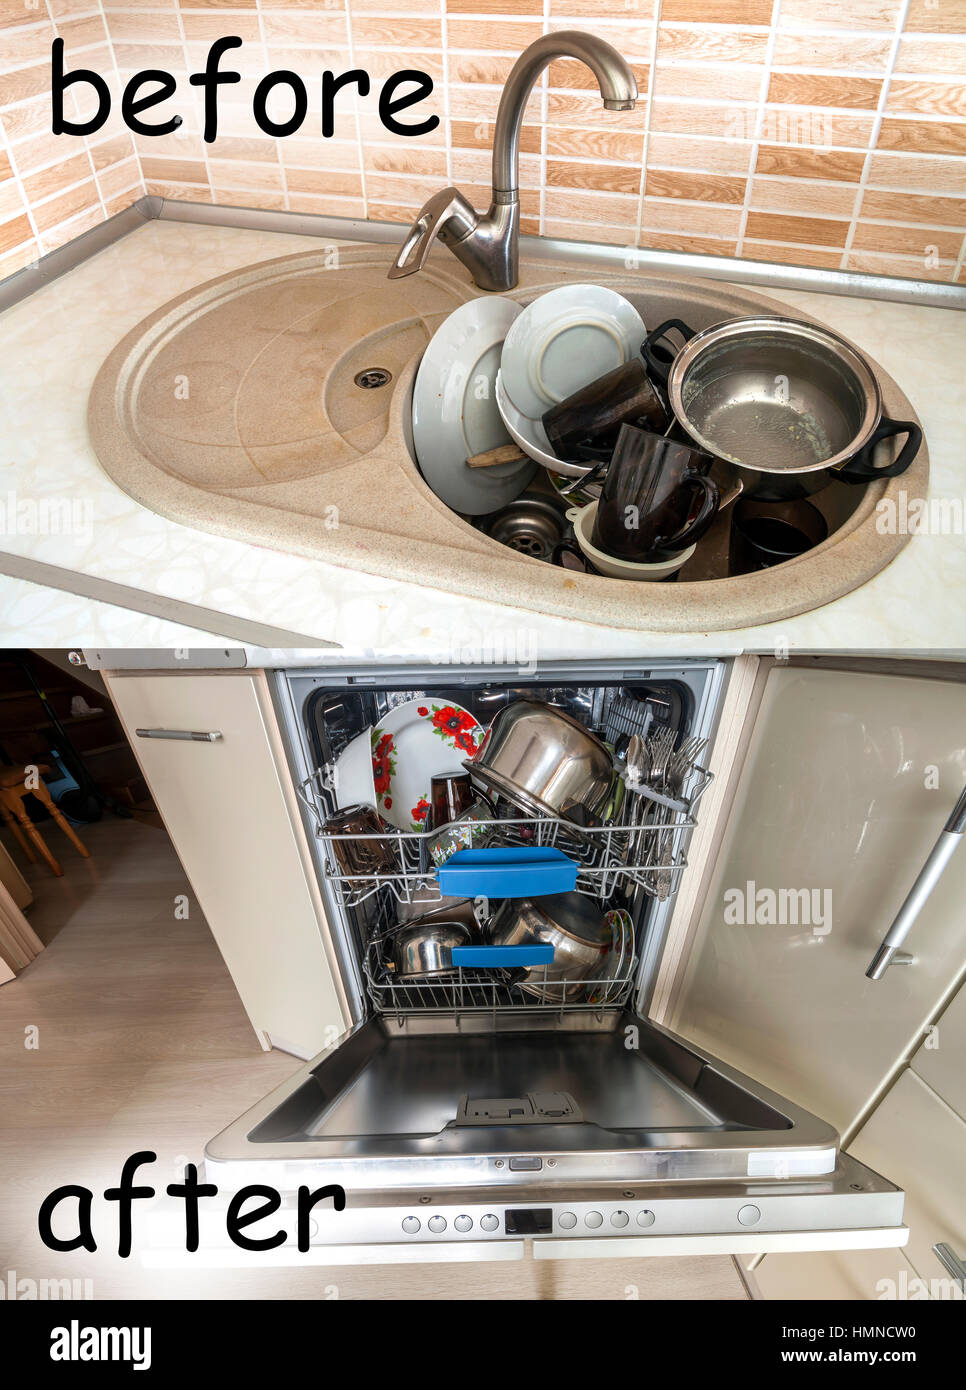 https://c8.alamy.com/comp/HMNCW0/sink-with-dirty-kitchenware-utensils-and-dishes-open-dishwasher-with-HMNCW0.jpg